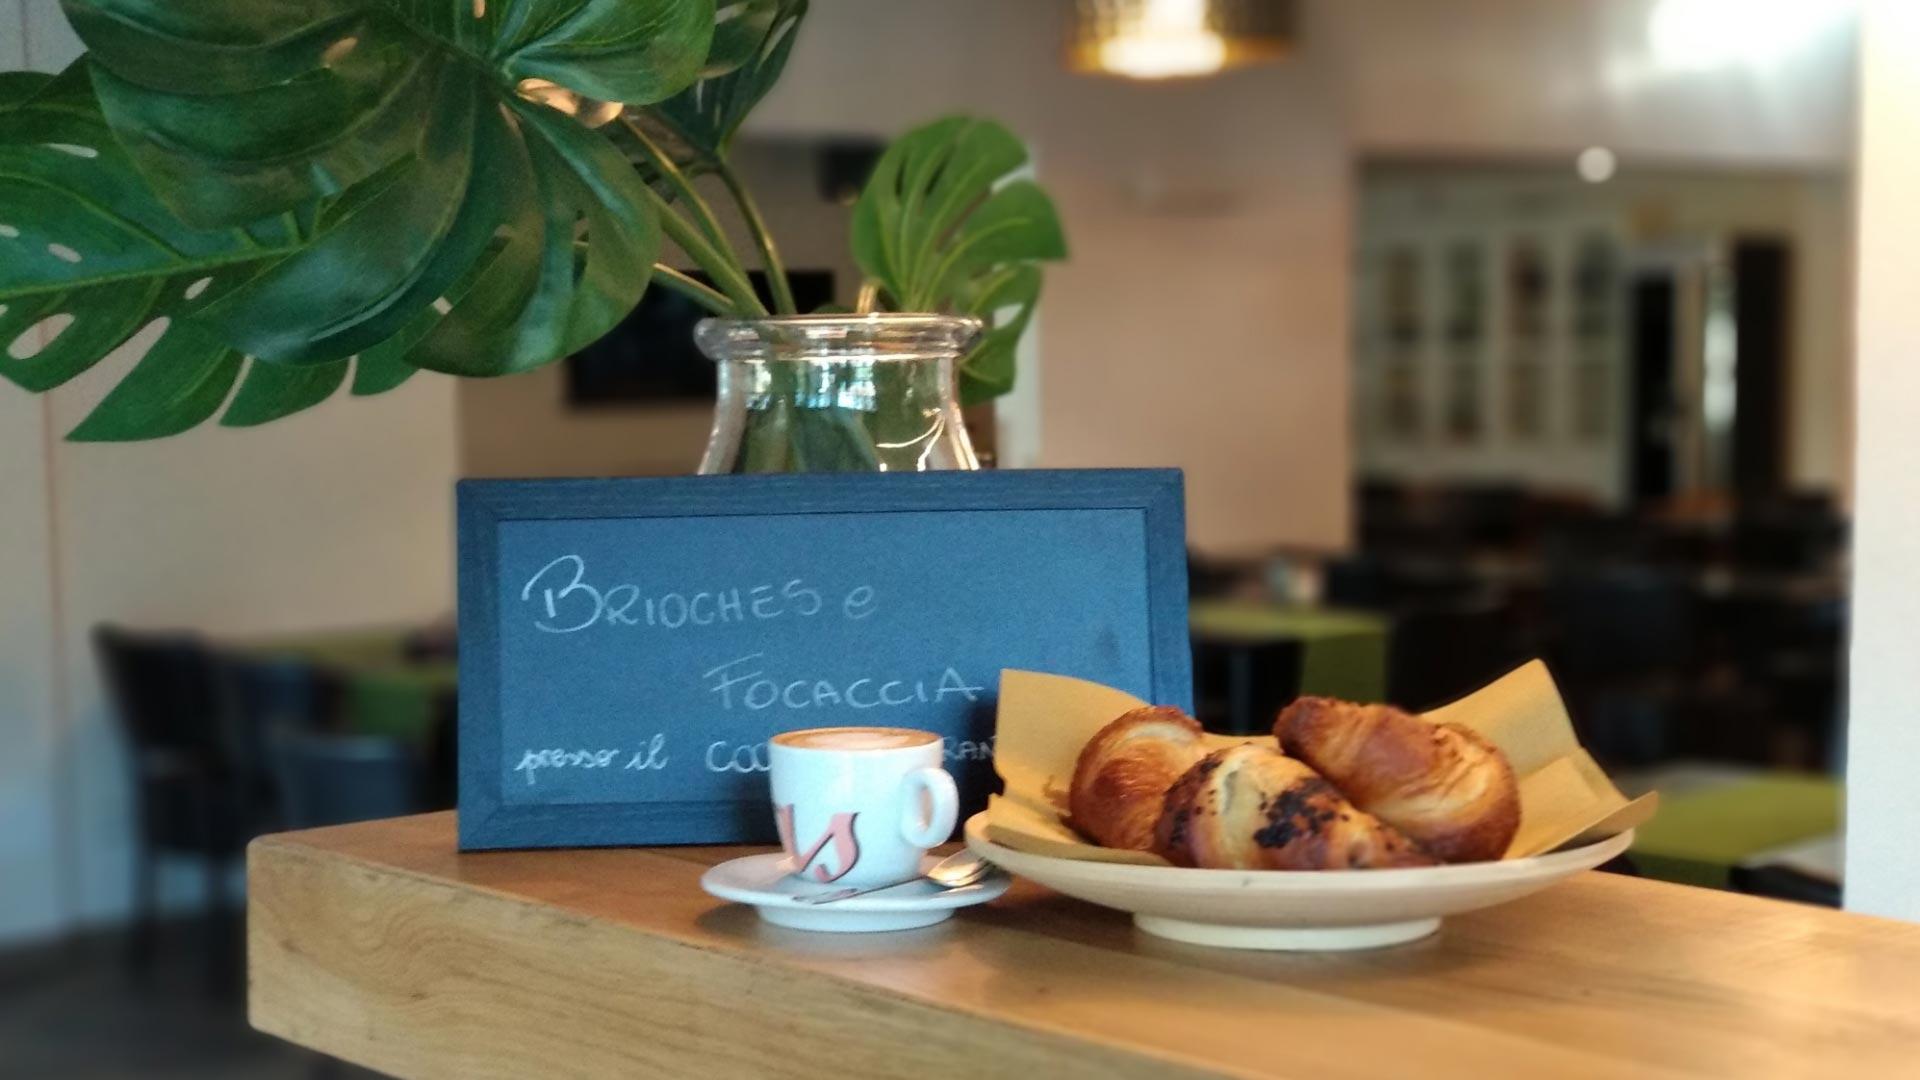 Coffee and croissants on a table with a chalkboard and decorative plant.